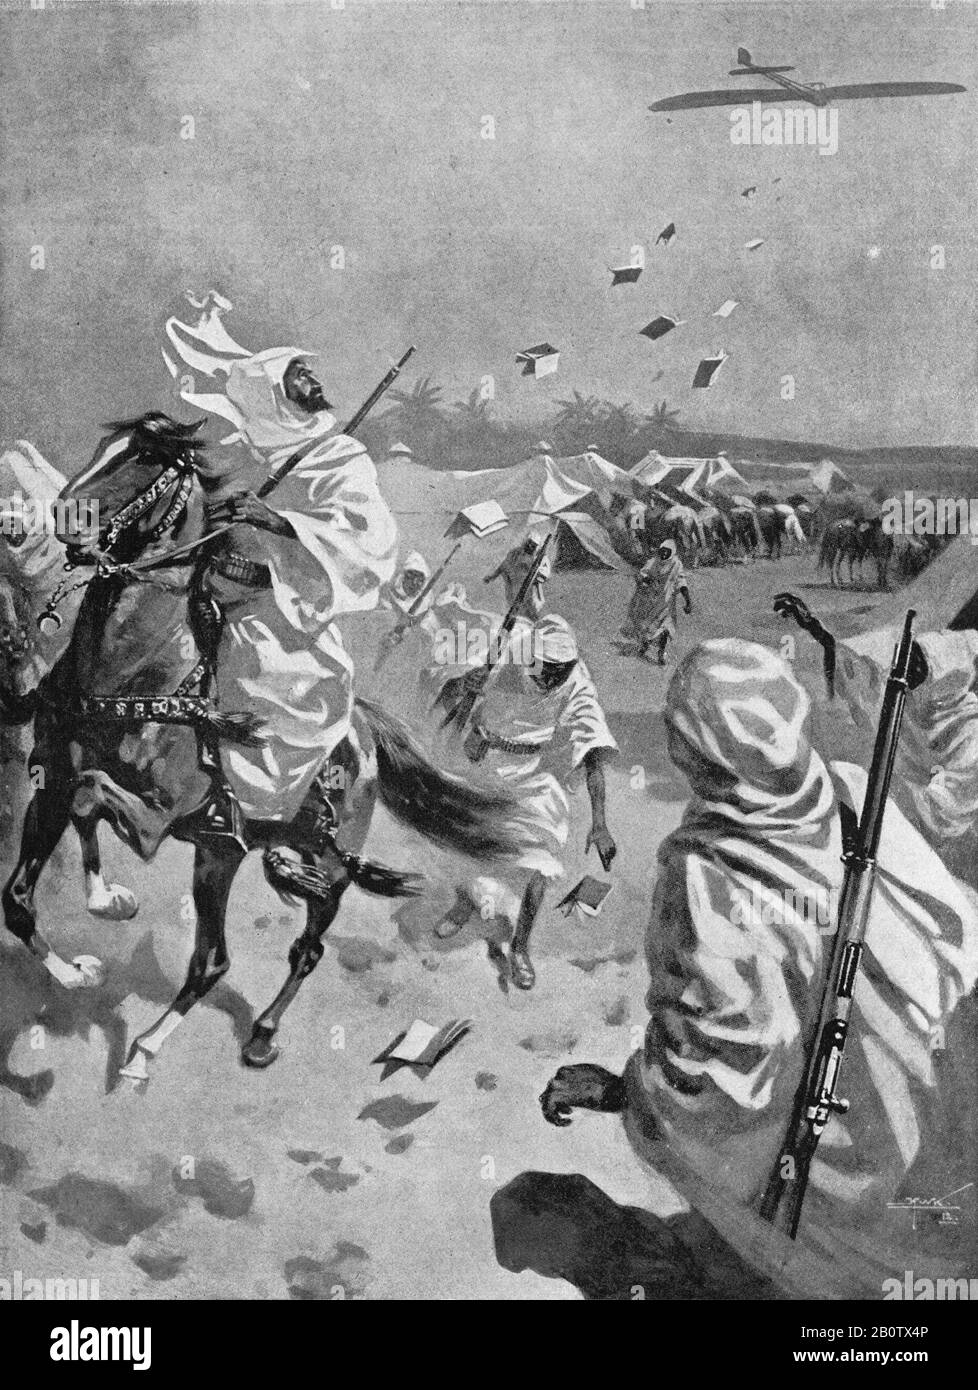 An illustration circa 1912 of an Italian airplane of the Royal Italian Army dropping propaganda leaflets over Arab horsemen in Libya during the Italian Turkish war of 1911 to 1912.    A precursor to World War One it established Italian rule over Libya until independence in 1947.  The conflict was the first recorded use of aircraft including the first aerial reconnaissance mission, bombing mission using German built Etrich Taube aircraft.  The Turks were also the first to shoot down an airplane using rifle fire. Stock Photo